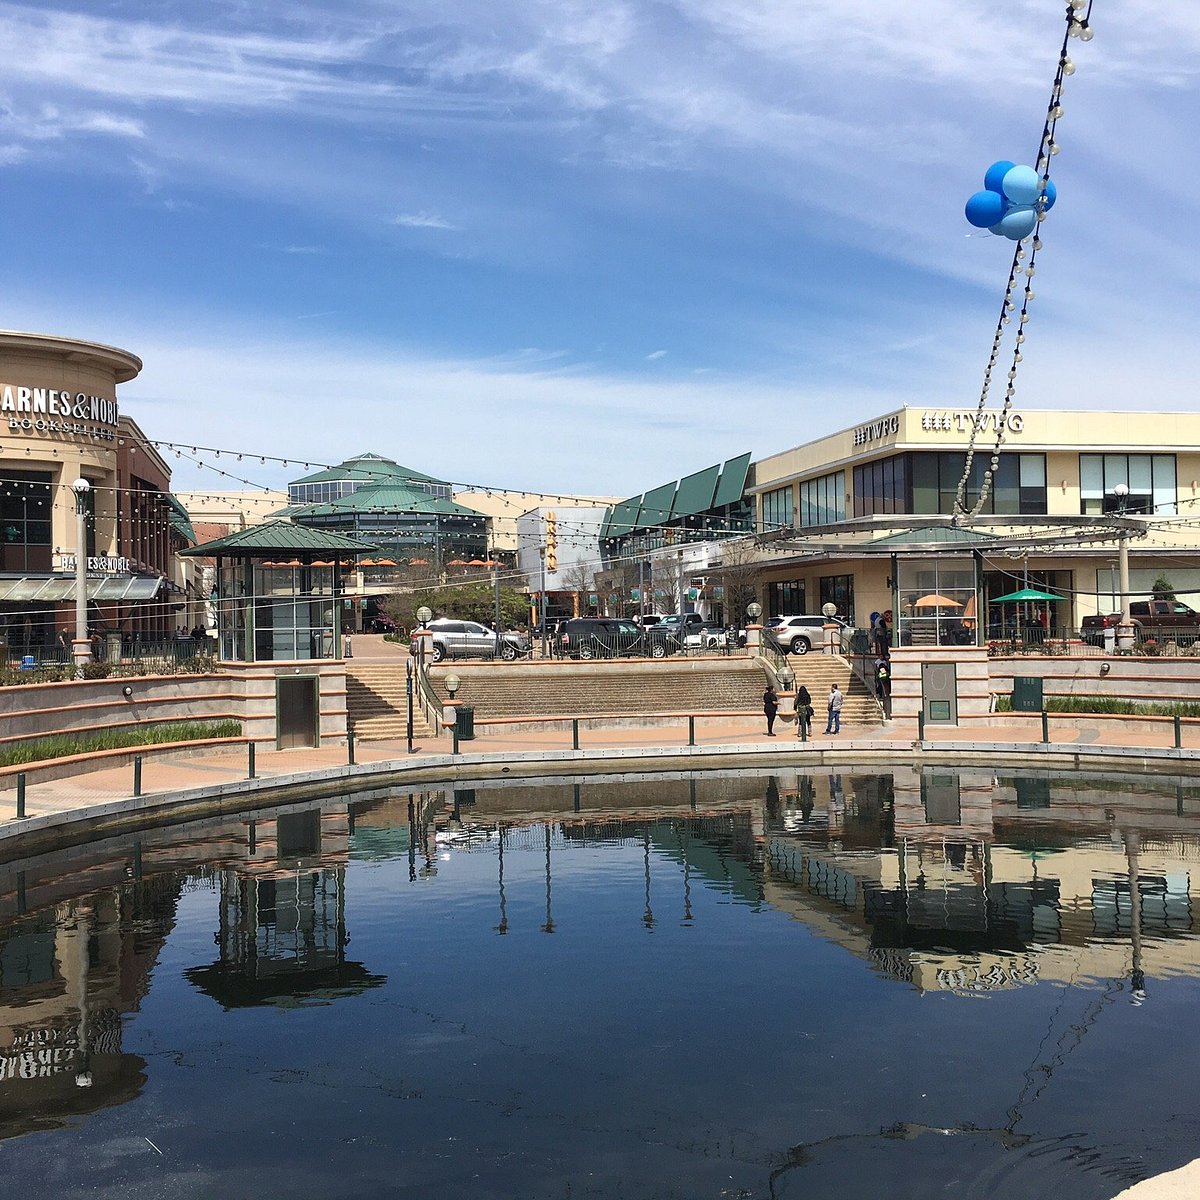 The Louisiana and Texas Retail Blogspot: The Woodlands Mall; The Woodlands  Texas